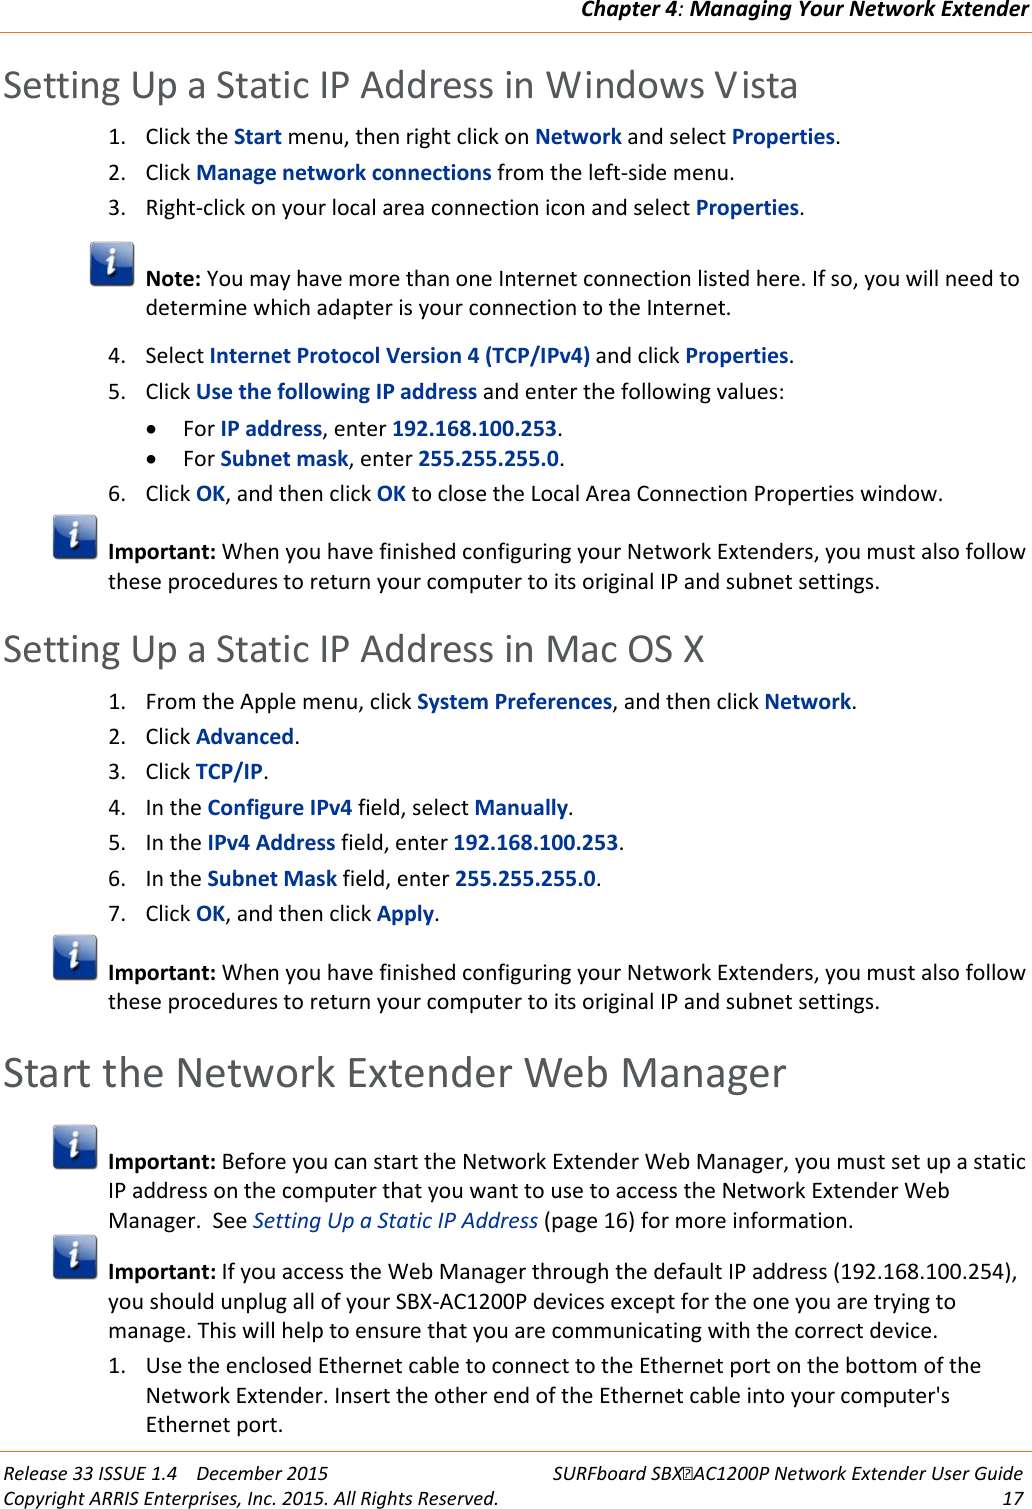 Chapter 4: Managing Your Network Extender  Release 33 ISSUE 1.4    December 2015 SURFboard SBXAC1200P Network Extender User Guide Copyright ARRIS Enterprises, Inc. 2015. All Rights Reserved. 17  Setting Up a Static IP Address in Windows Vista 1. Click the Start menu, then right click on Network and select Properties. 2. Click Manage network connections from the left-side menu. 3. Right-click on your local area connection icon and select Properties.  Note: You may have more than one Internet connection listed here. If so, you will need to determine which adapter is your connection to the Internet. 4. Select Internet Protocol Version 4 (TCP/IPv4) and click Properties. 5. Click Use the following IP address and enter the following values: • For IP address, enter 192.168.100.253. • For Subnet mask, enter 255.255.255.0. 6. Click OK, and then click OK to close the Local Area Connection Properties window.  Important: When you have finished configuring your Network Extenders, you must also follow these procedures to return your computer to its original IP and subnet settings.   Setting Up a Static IP Address in Mac OS X 1. From the Apple menu, click System Preferences, and then click Network. 2. Click Advanced. 3. Click TCP/IP. 4. In the Configure IPv4 field, select Manually. 5. In the IPv4 Address field, enter 192.168.100.253. 6. In the Subnet Mask field, enter 255.255.255.0. 7. Click OK, and then click Apply.  Important: When you have finished configuring your Network Extenders, you must also follow these procedures to return your computer to its original IP and subnet settings.   Start the Network Extender Web Manager  Important: Before you can start the Network Extender Web Manager, you must set up a static IP address on the computer that you want to use to access the Network Extender Web Manager.  See Setting Up a Static IP Address (page 16) for more information.  Important: If you access the Web Manager through the default IP address (192.168.100.254), you should unplug all of your SBX-AC1200P devices except for the one you are trying to manage. This will help to ensure that you are communicating with the correct device. 1. Use the enclosed Ethernet cable to connect to the Ethernet port on the bottom of the Network Extender. Insert the other end of the Ethernet cable into your computer&apos;s Ethernet port. 